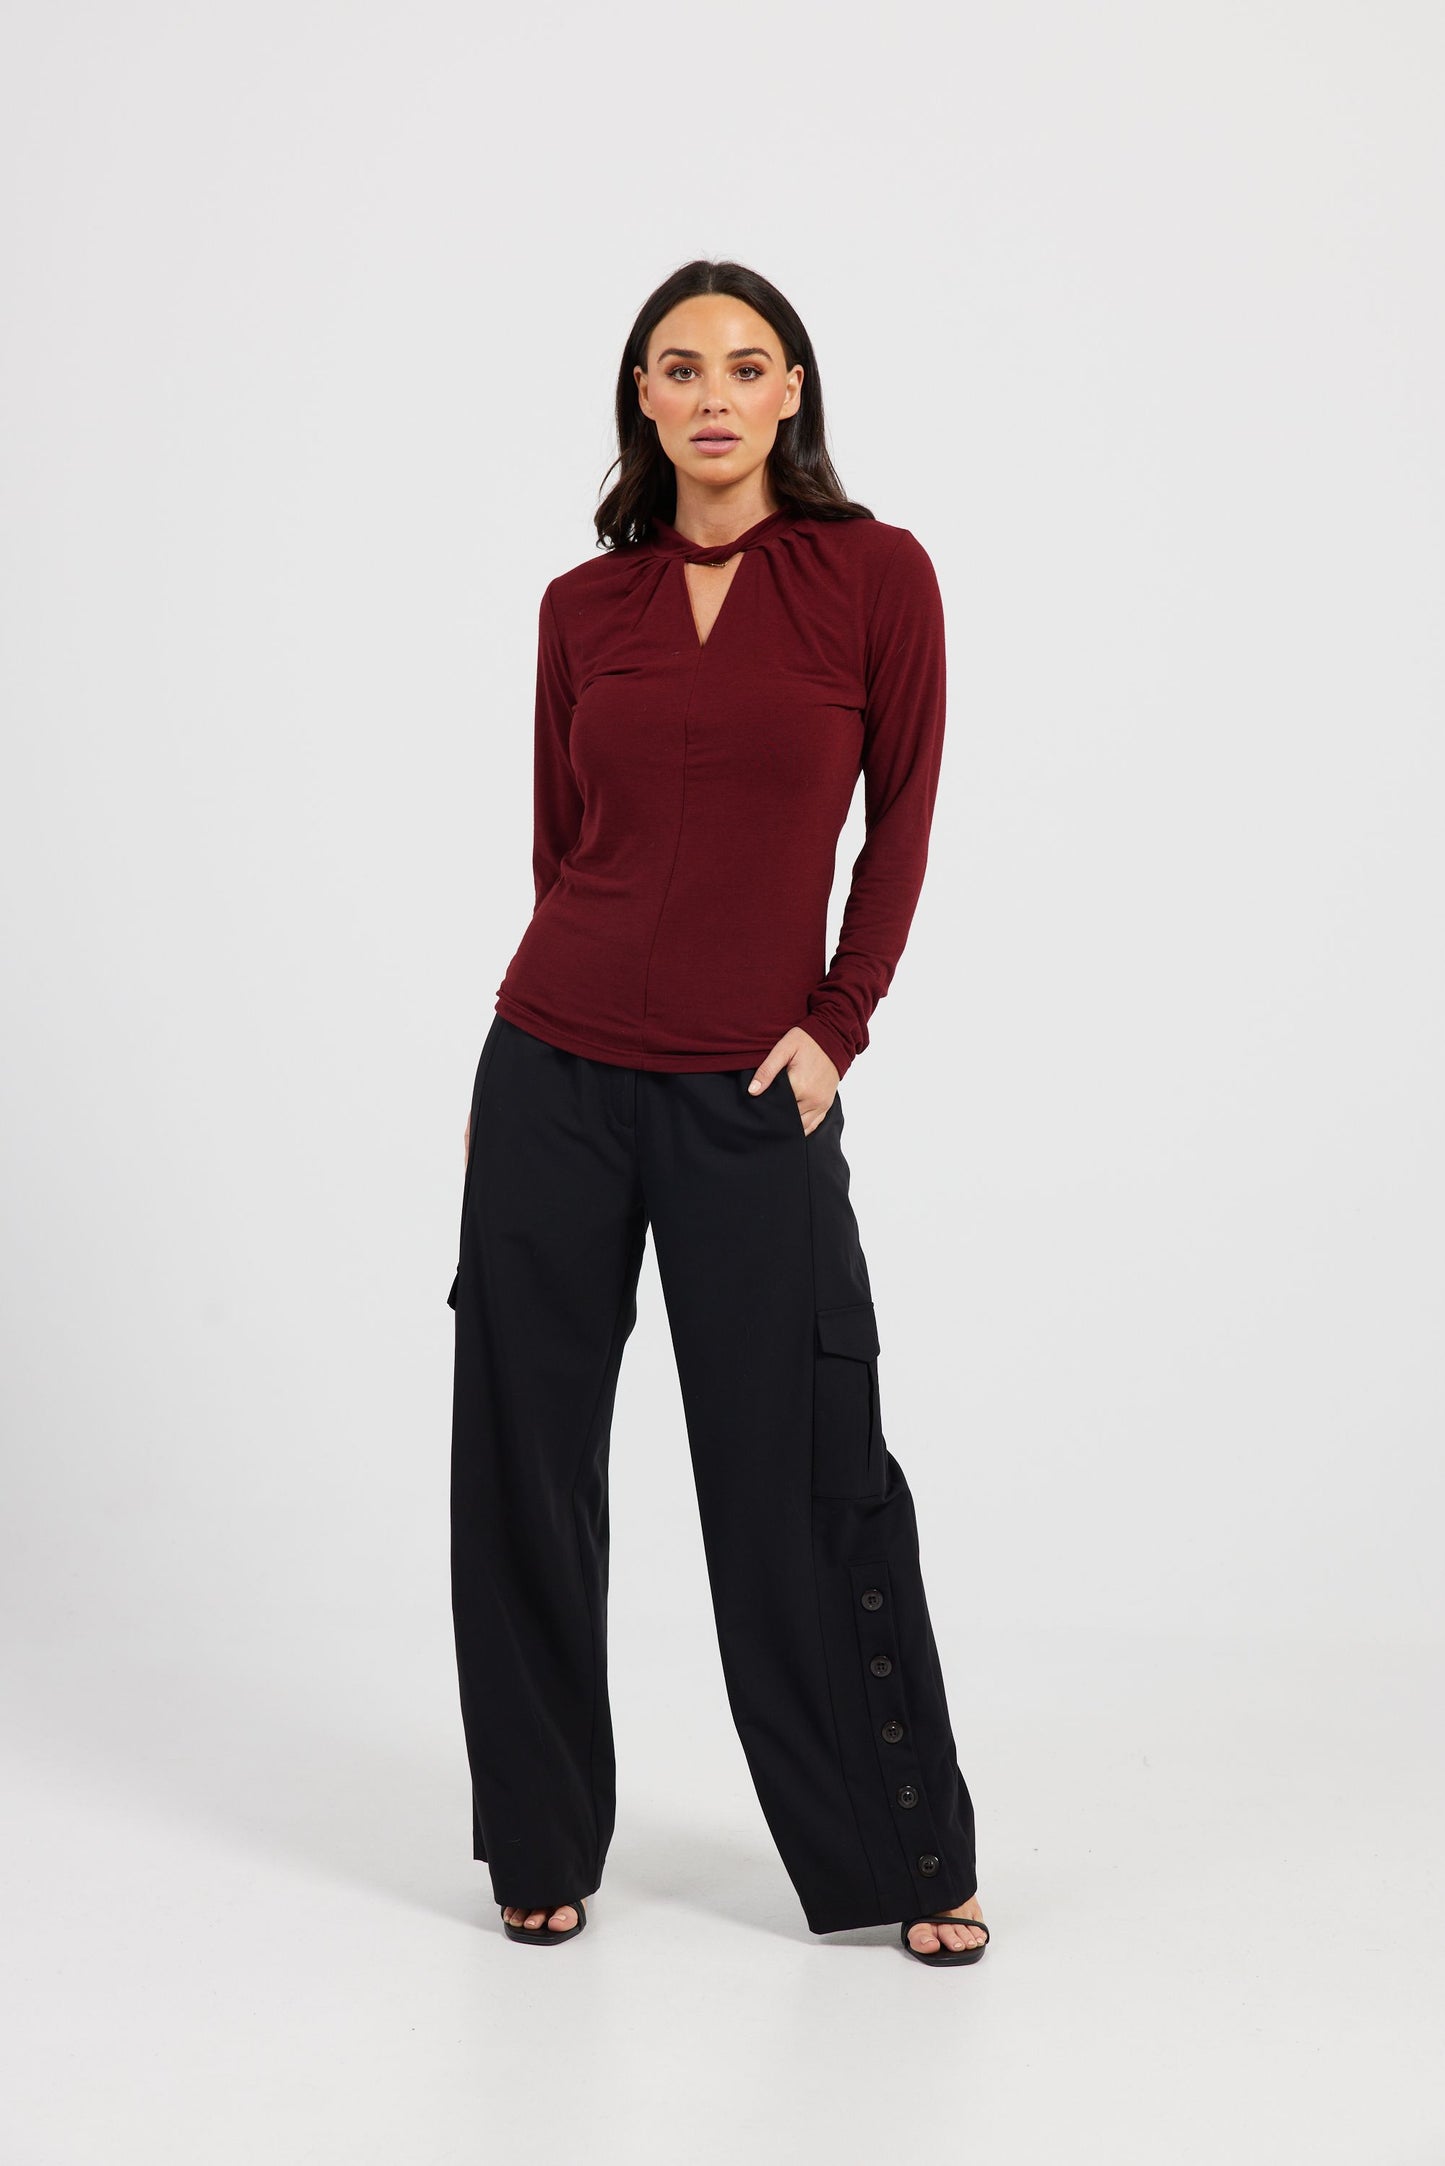 Marnie Long Sleeve Top (Berry Jersey)